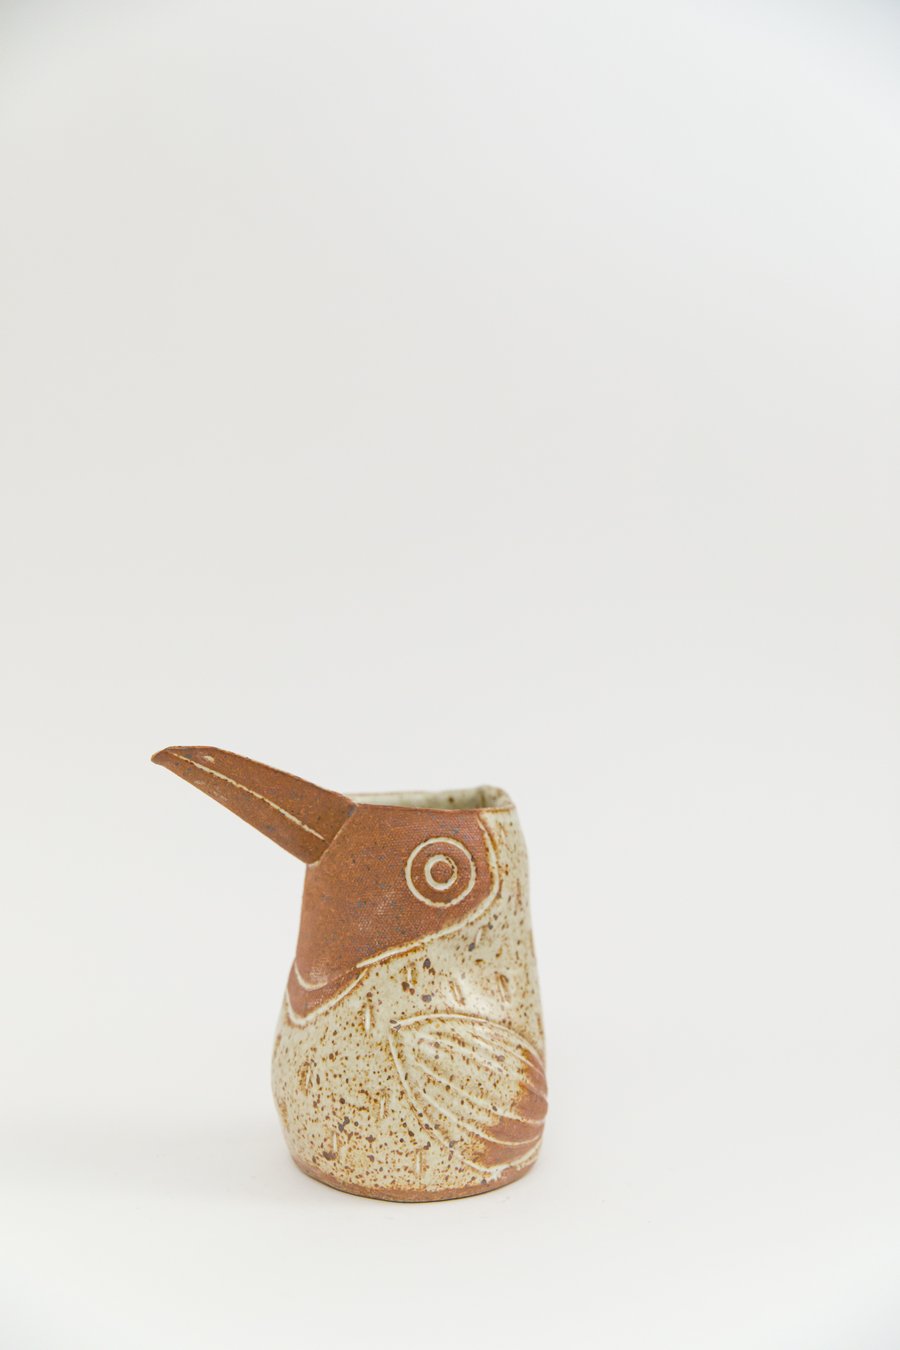 Image of Medium Toasty Speckled Handleless Toucan Pitcher